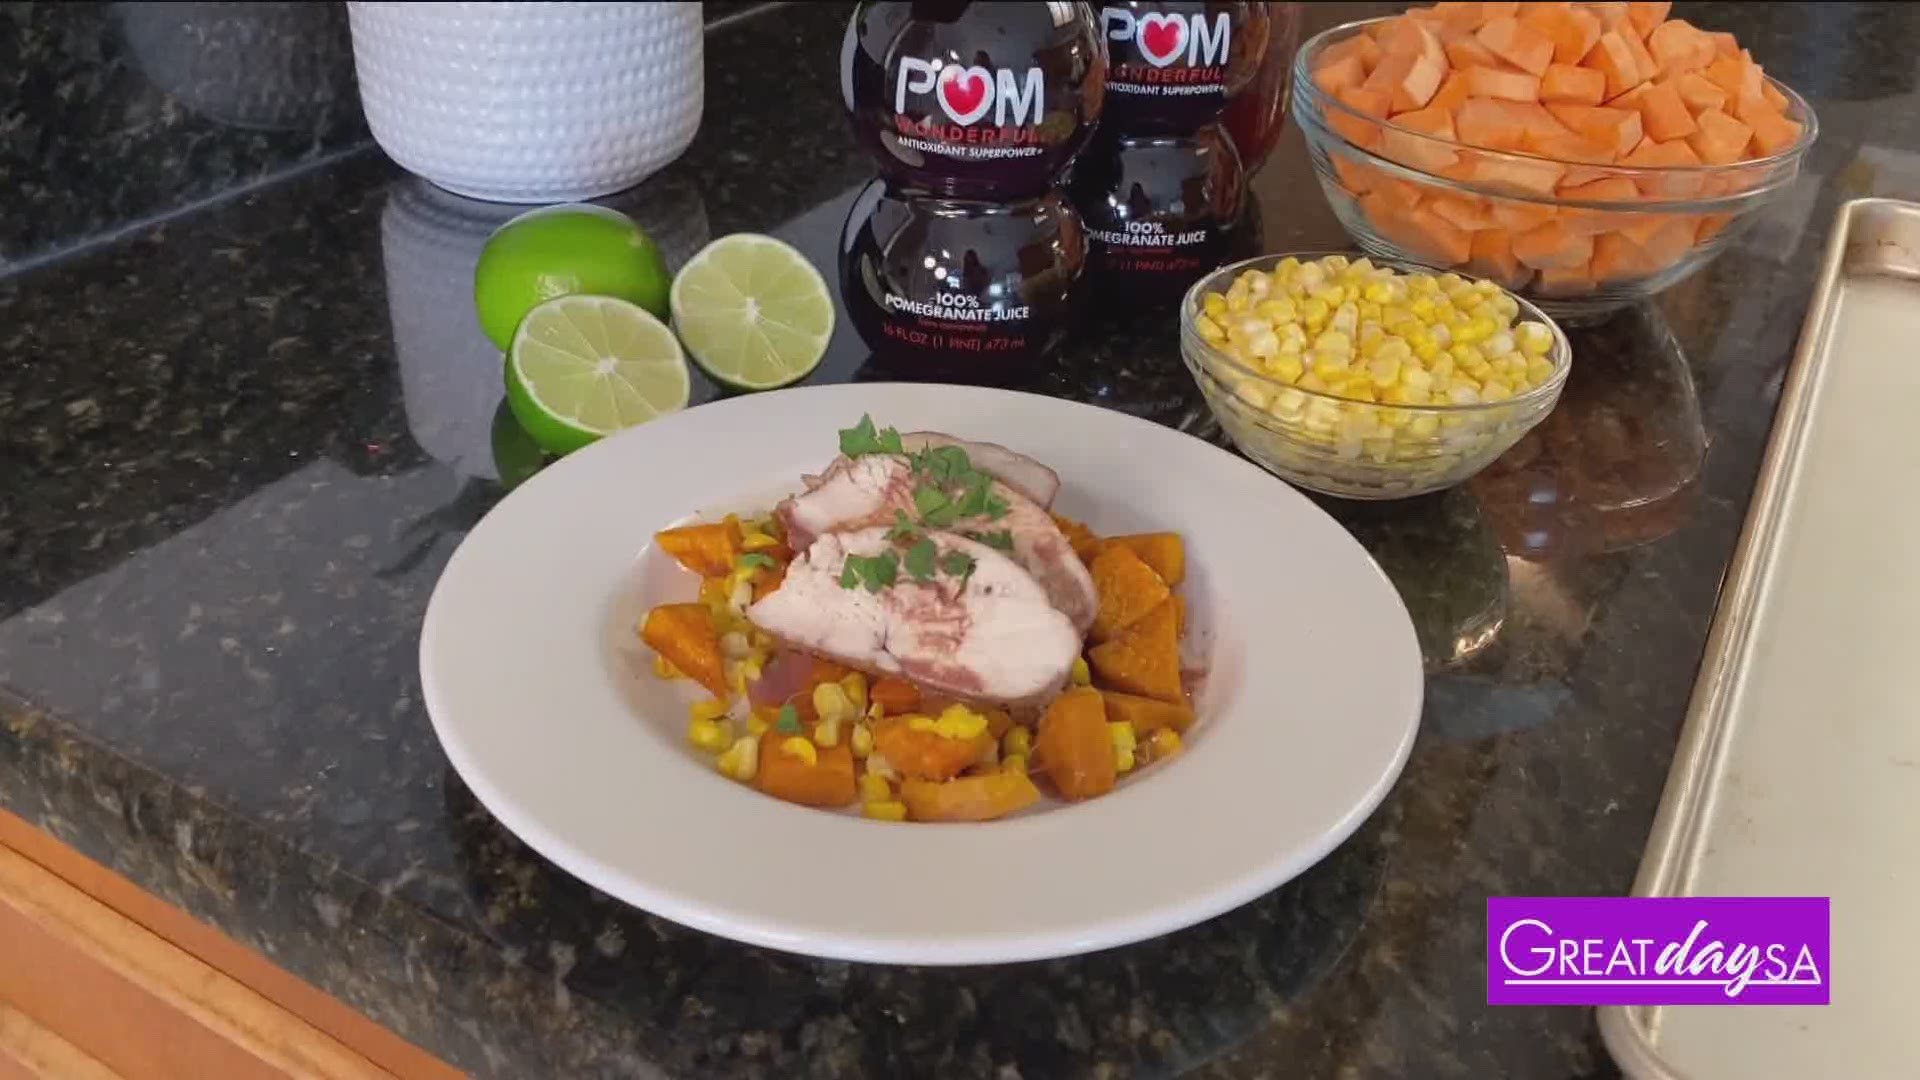 Shannon uses pomegranate juice to bring new life to chicken breasts.